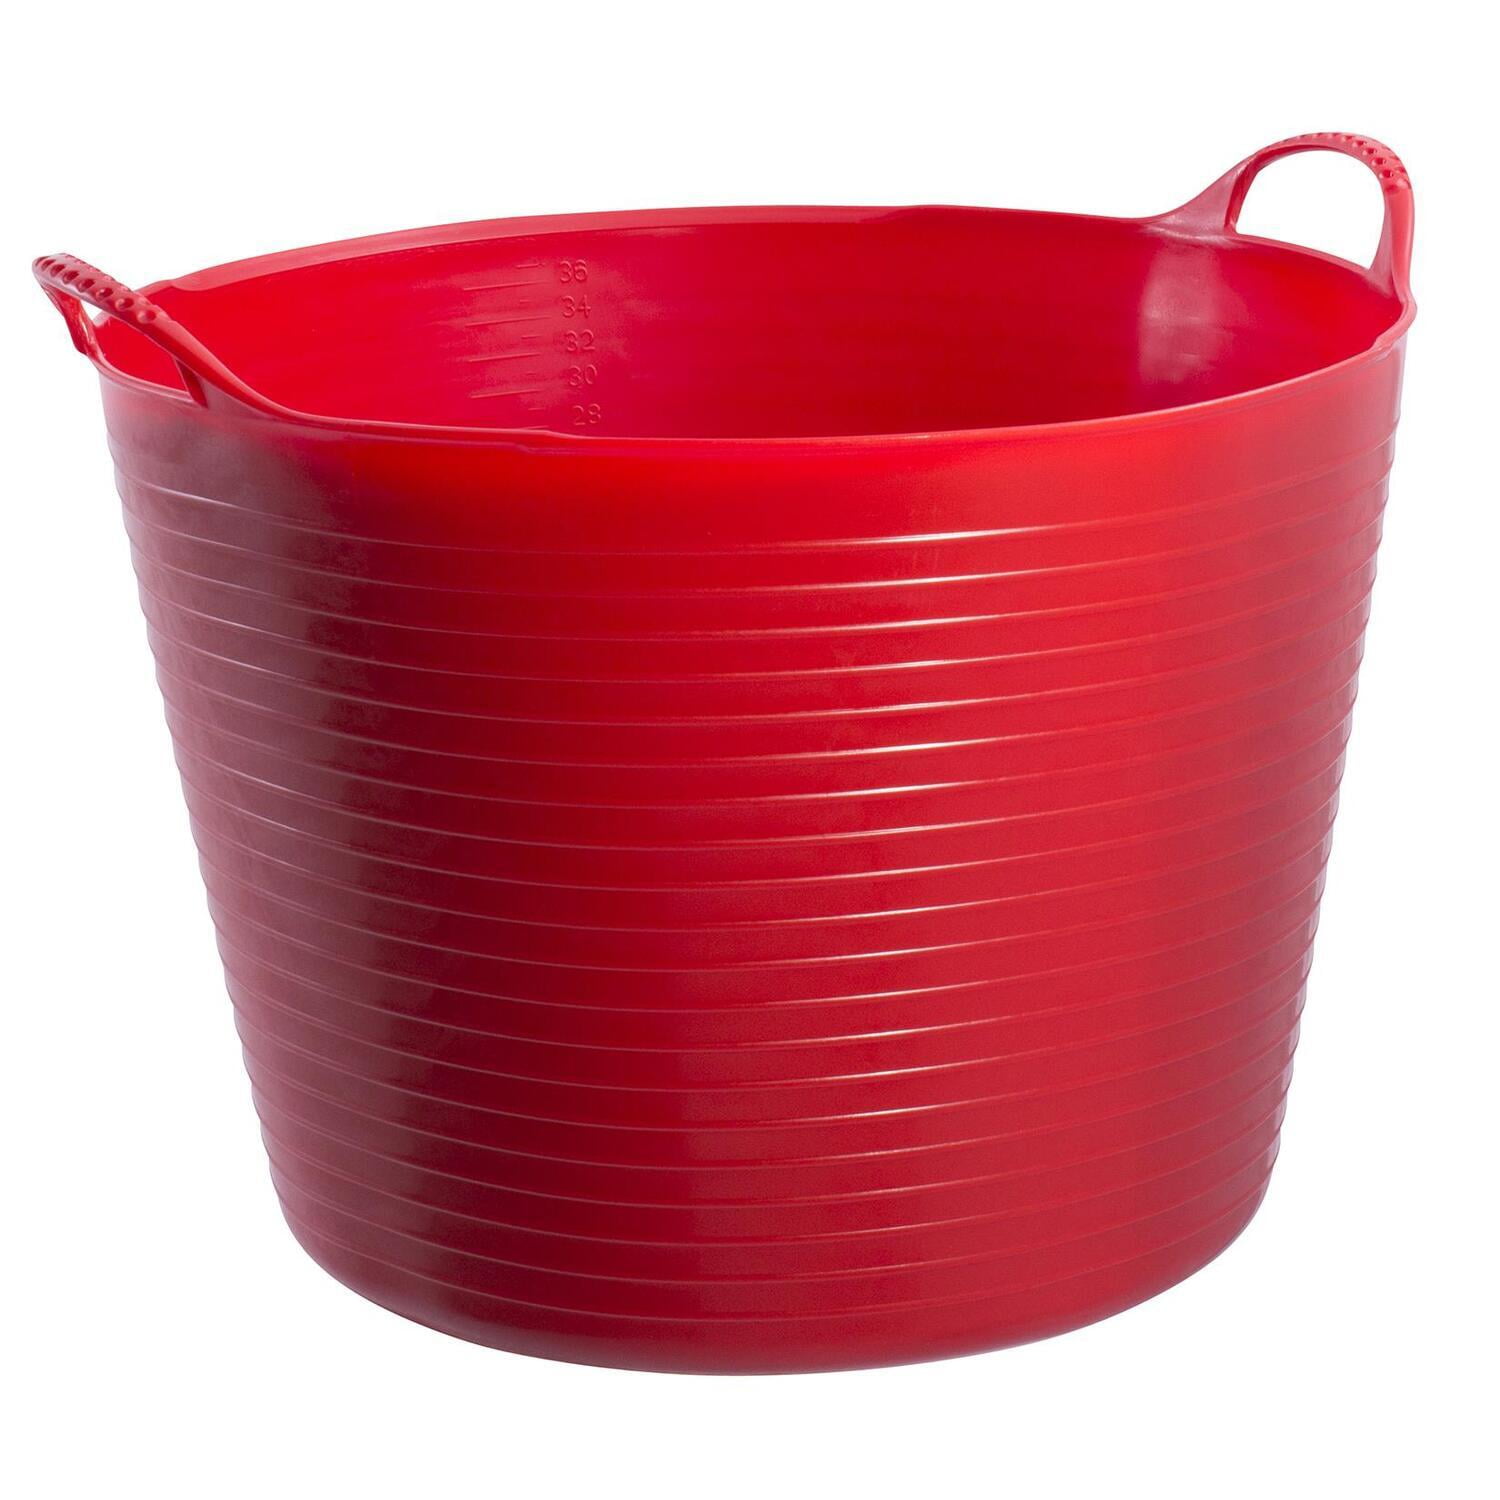 12 PACK Red Gorilla Micro Tubtrugs Flexible Storage Bucket Basket.Endless Uses!! Assorted Colours & Tigerbox® Antibacterial Pen